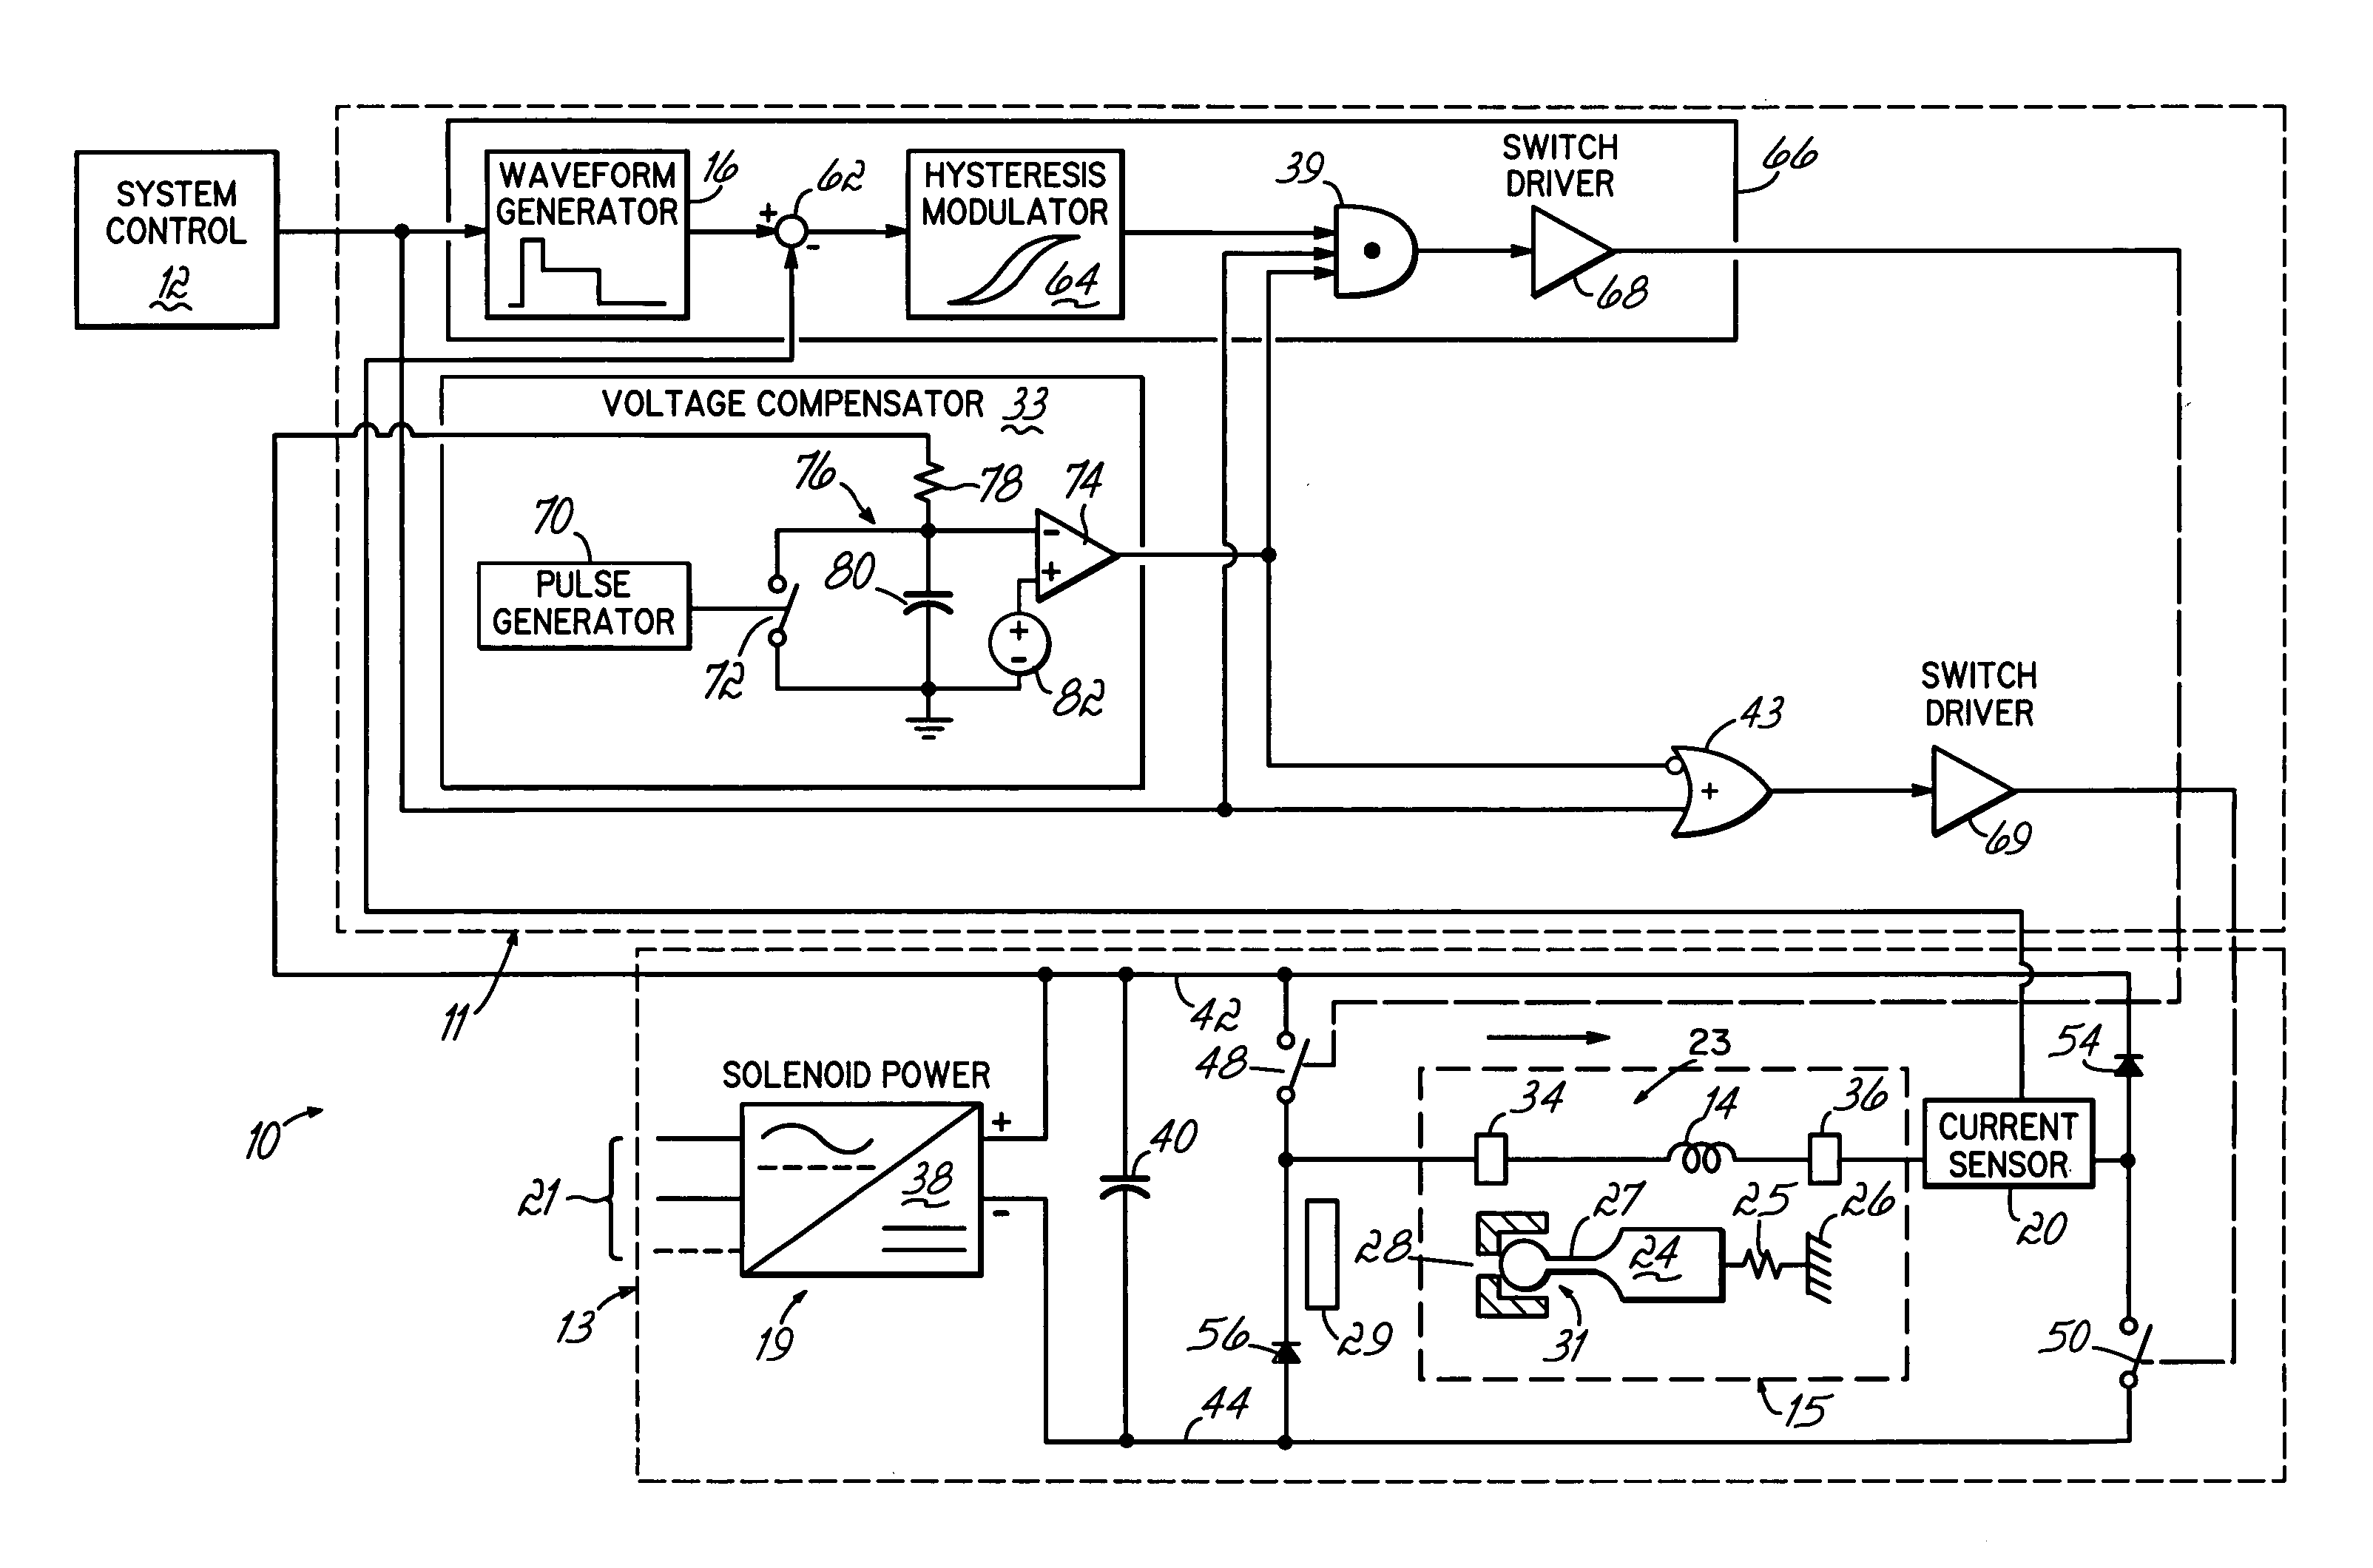 Using voltage feed forward to control a solenoid valve